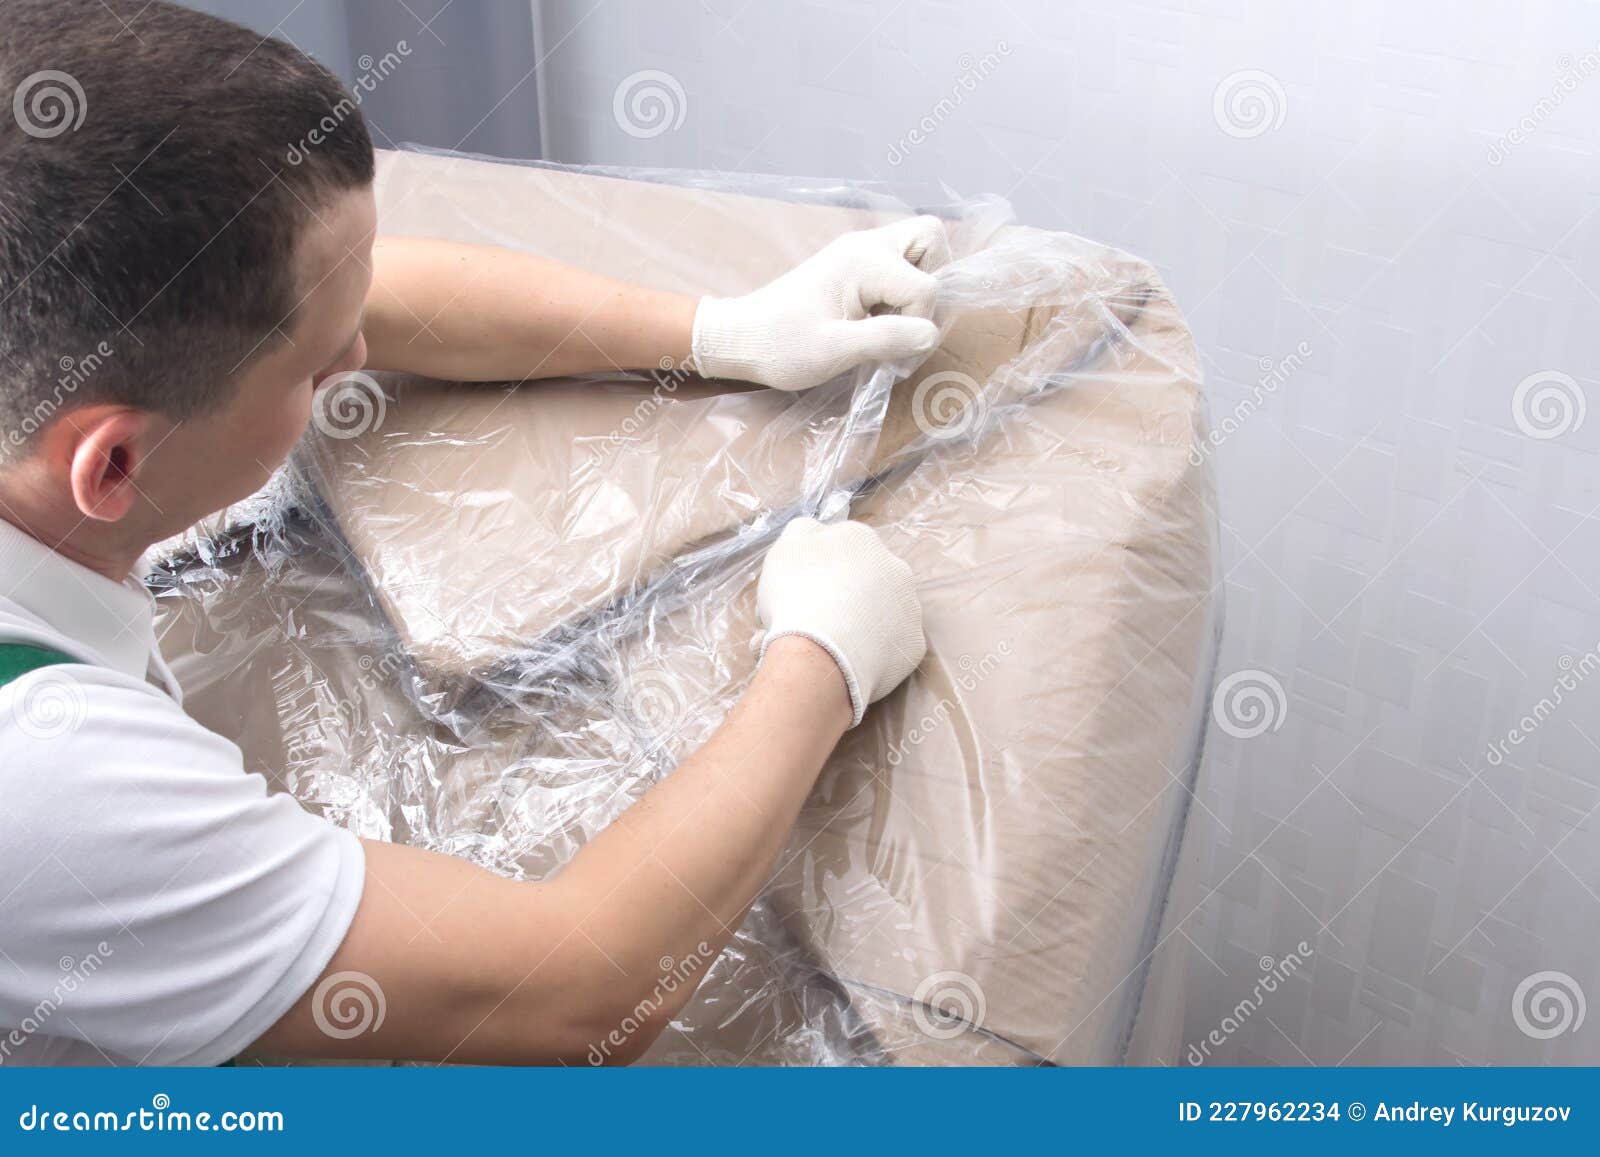 https://thumbs.dreamstime.com/z/delivery-man-protective-gloves-opens-furniture-box-cuts-dense-transparent-polyethylene-227962234.jpg